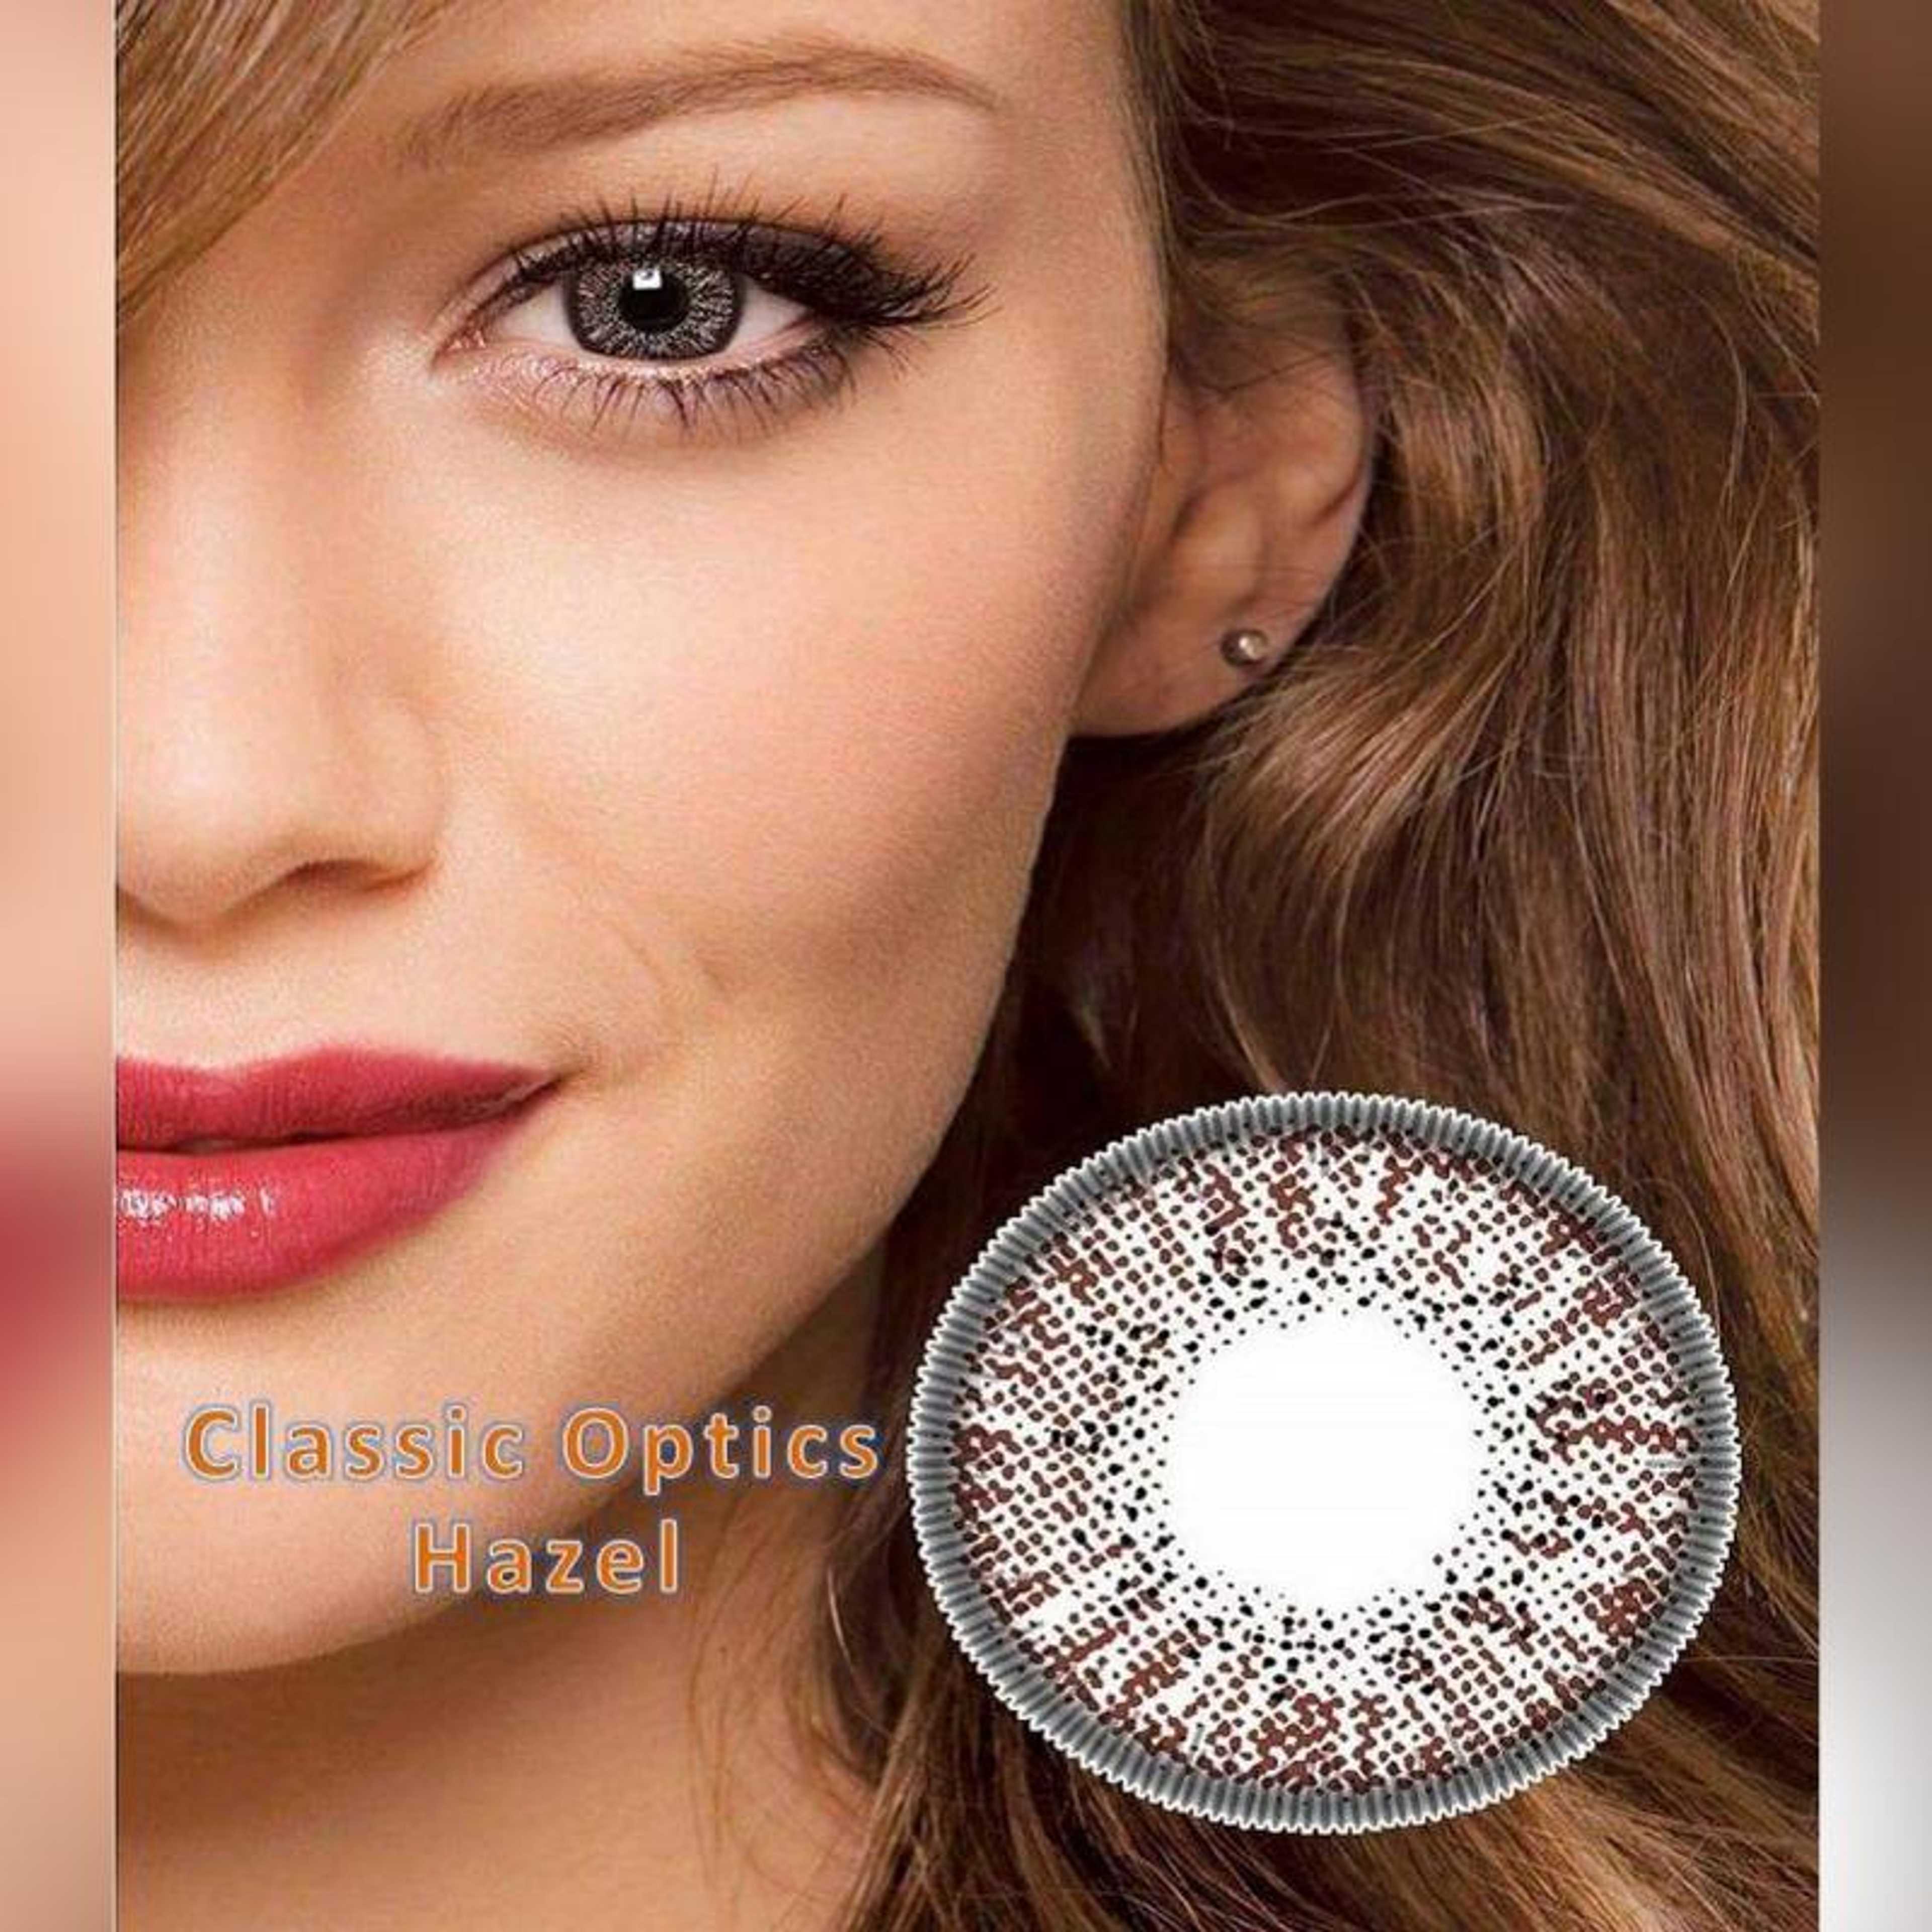 US Vision Daily Wear Hazel Double Shade Contact Lenses